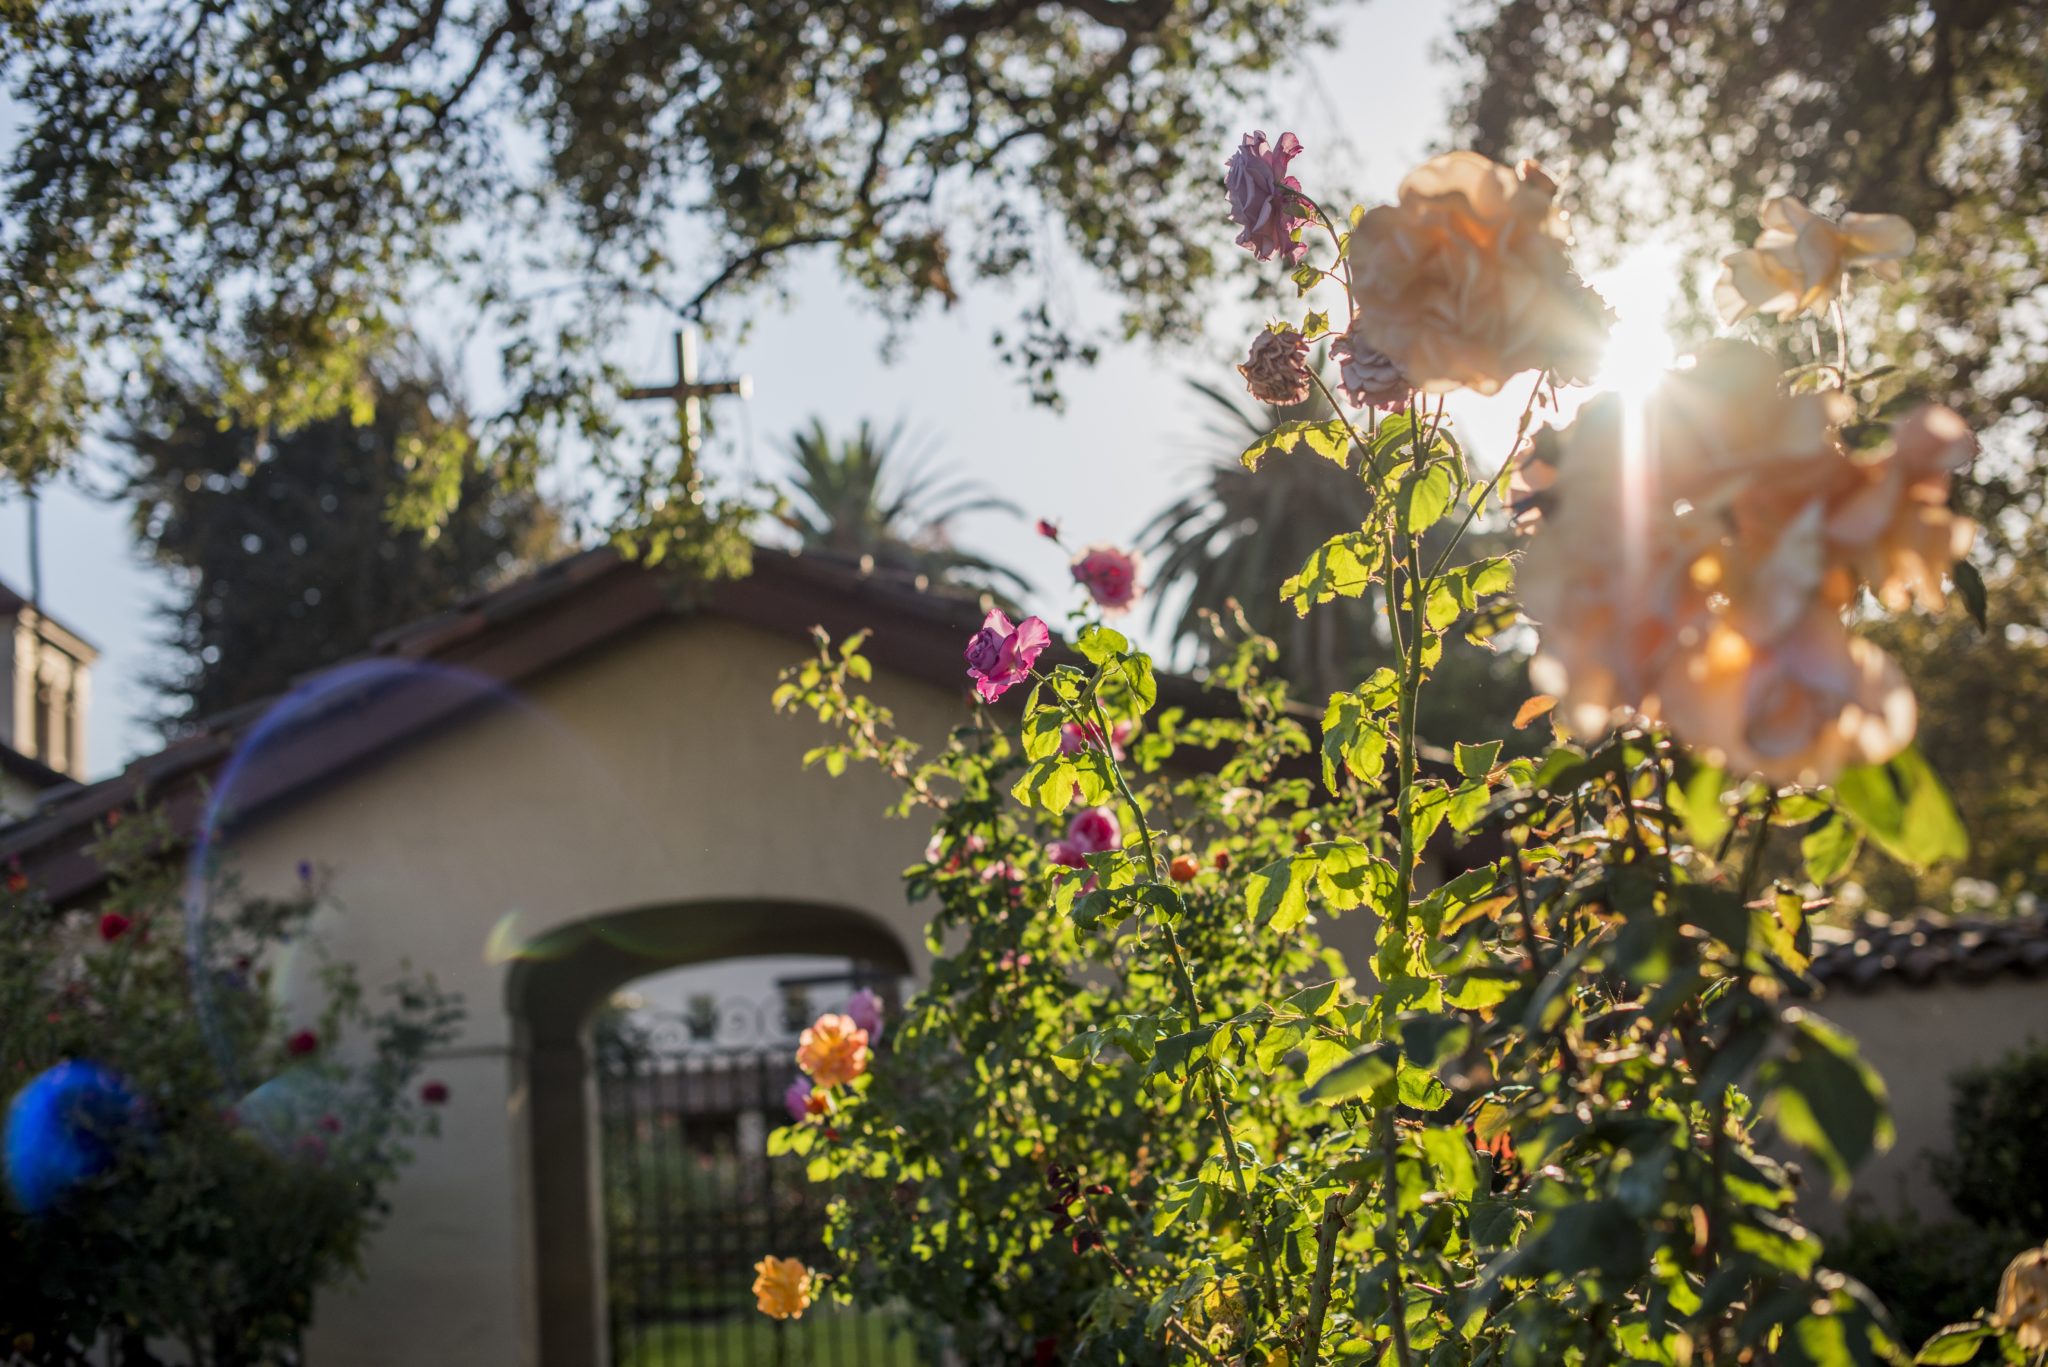 Meet me at the gate of the Rose Garden: the original Mission cemetery—then for years site of the student chapel. It was planted with roses after the Mission burned in 1926.